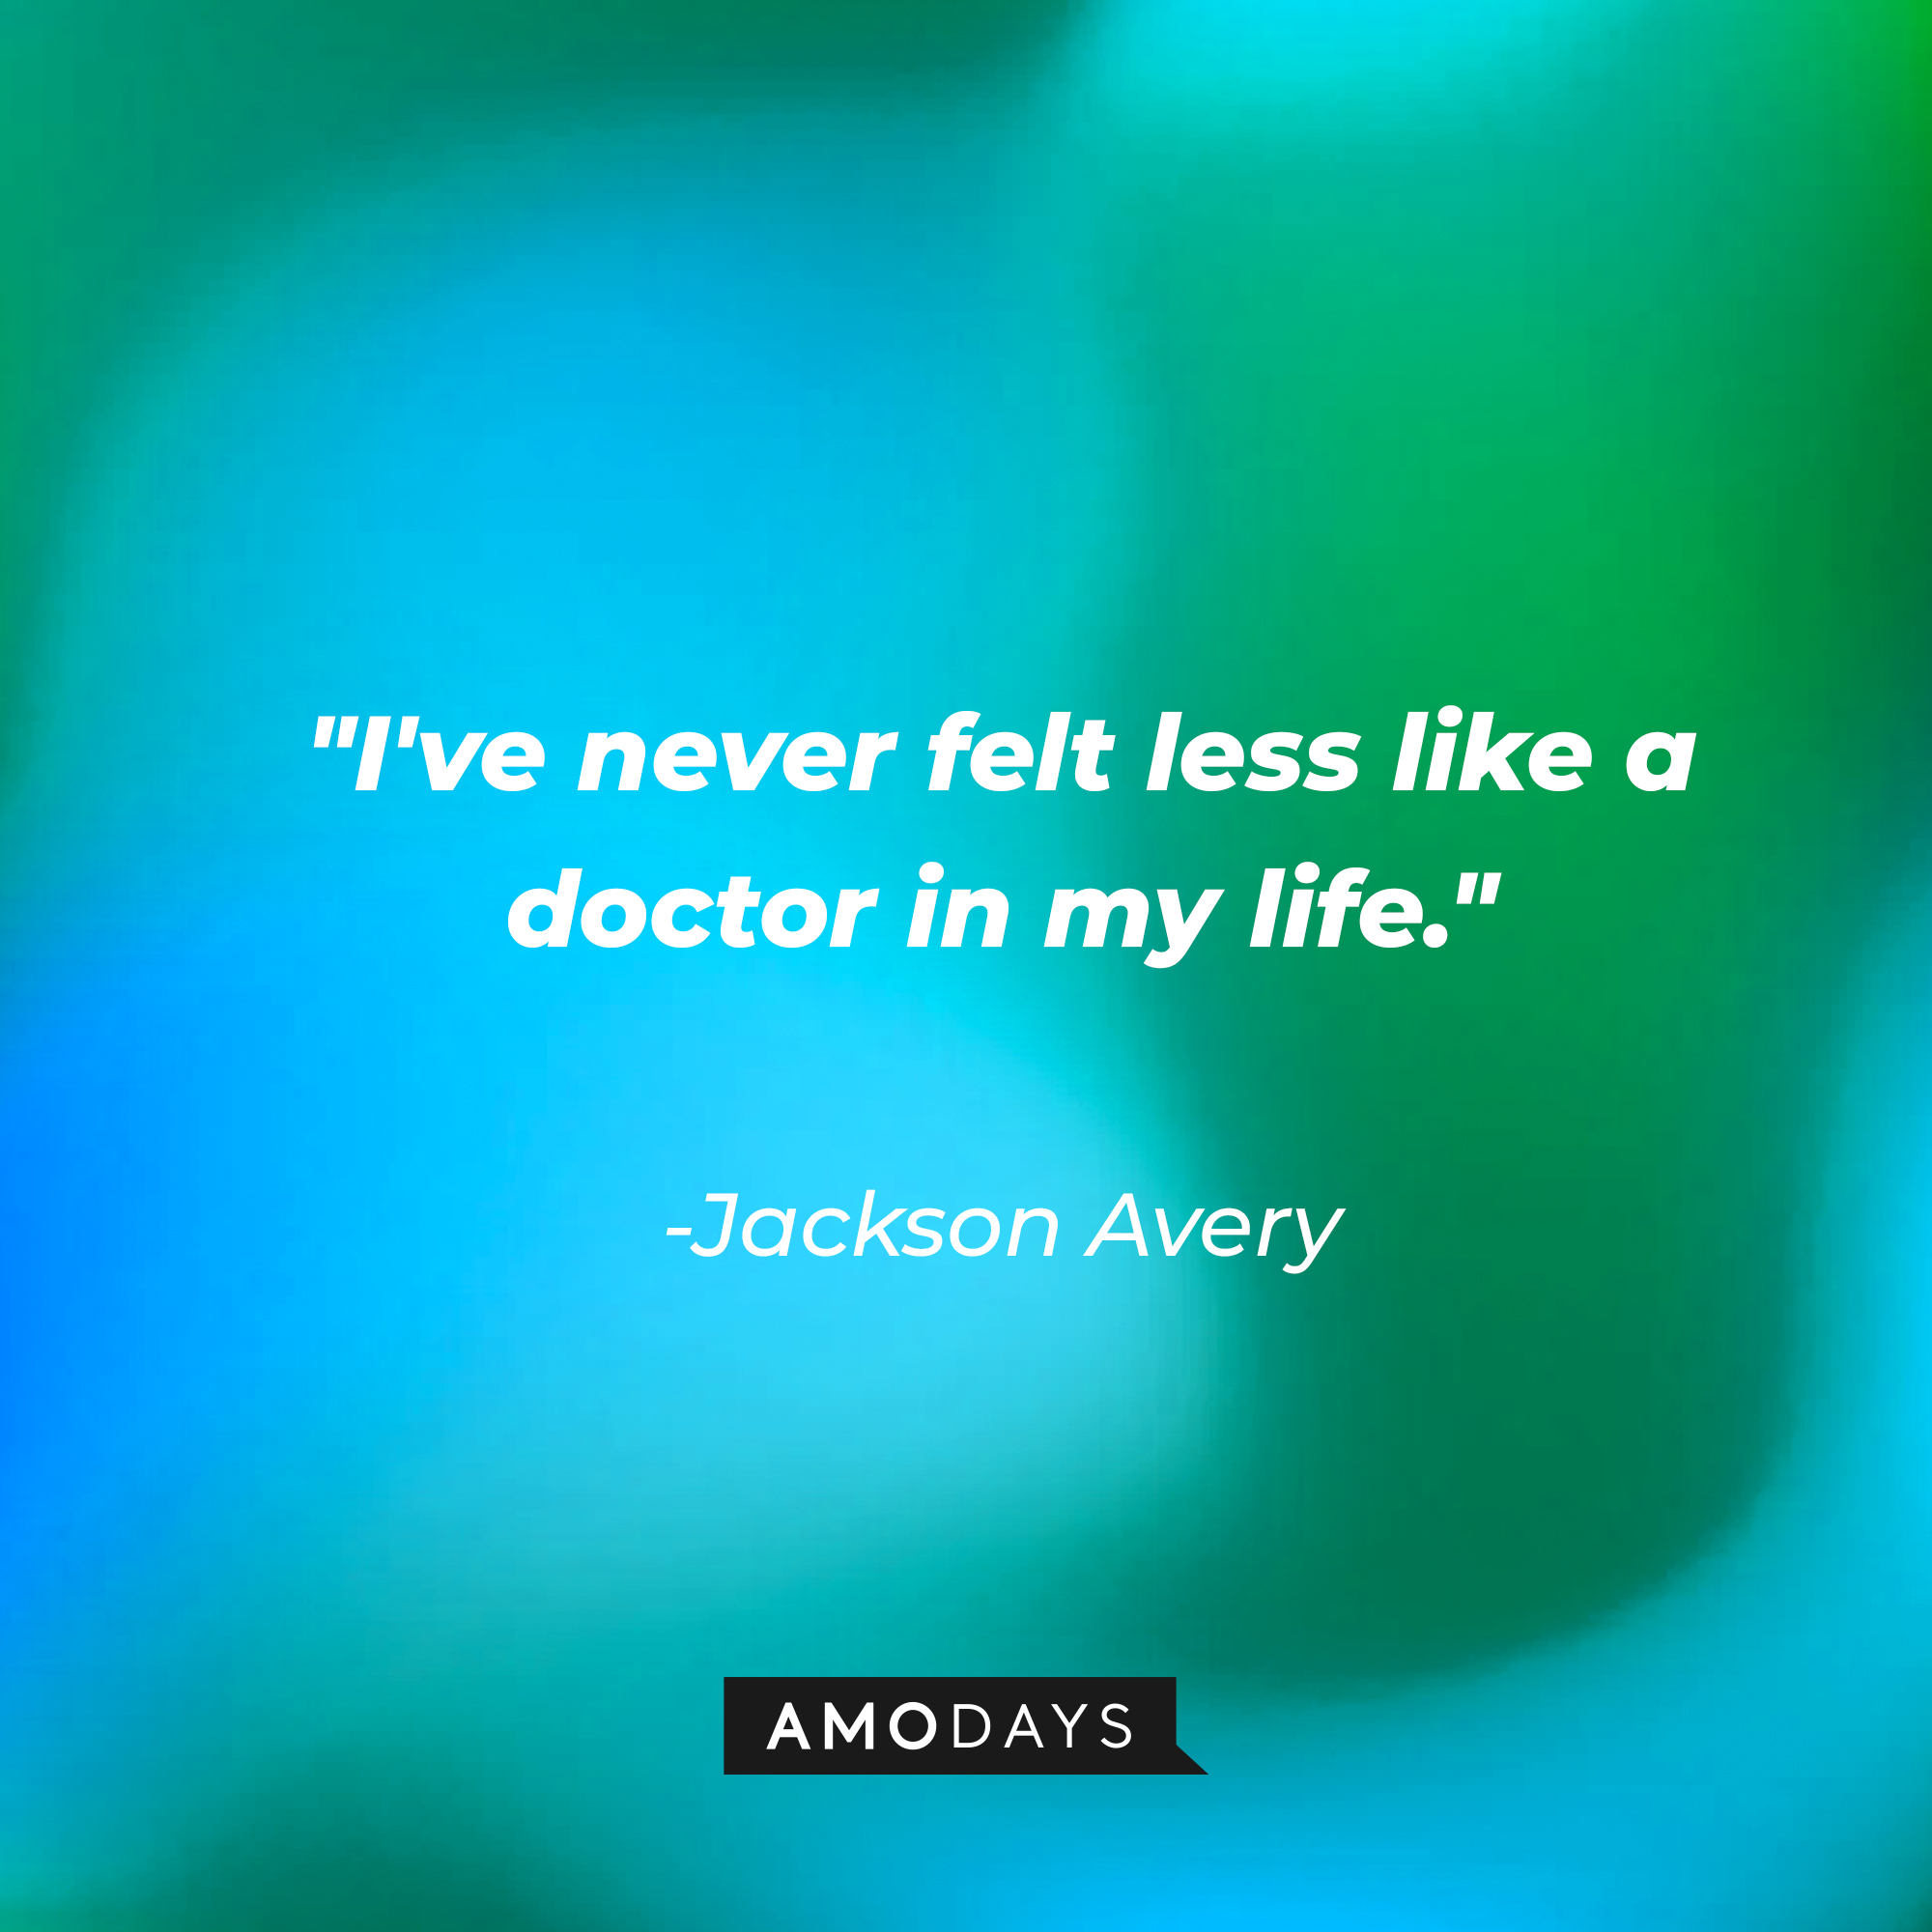 Jackson Avery’s quote: “I've never felt less like a doctor in my life.” |Source: AmoDays